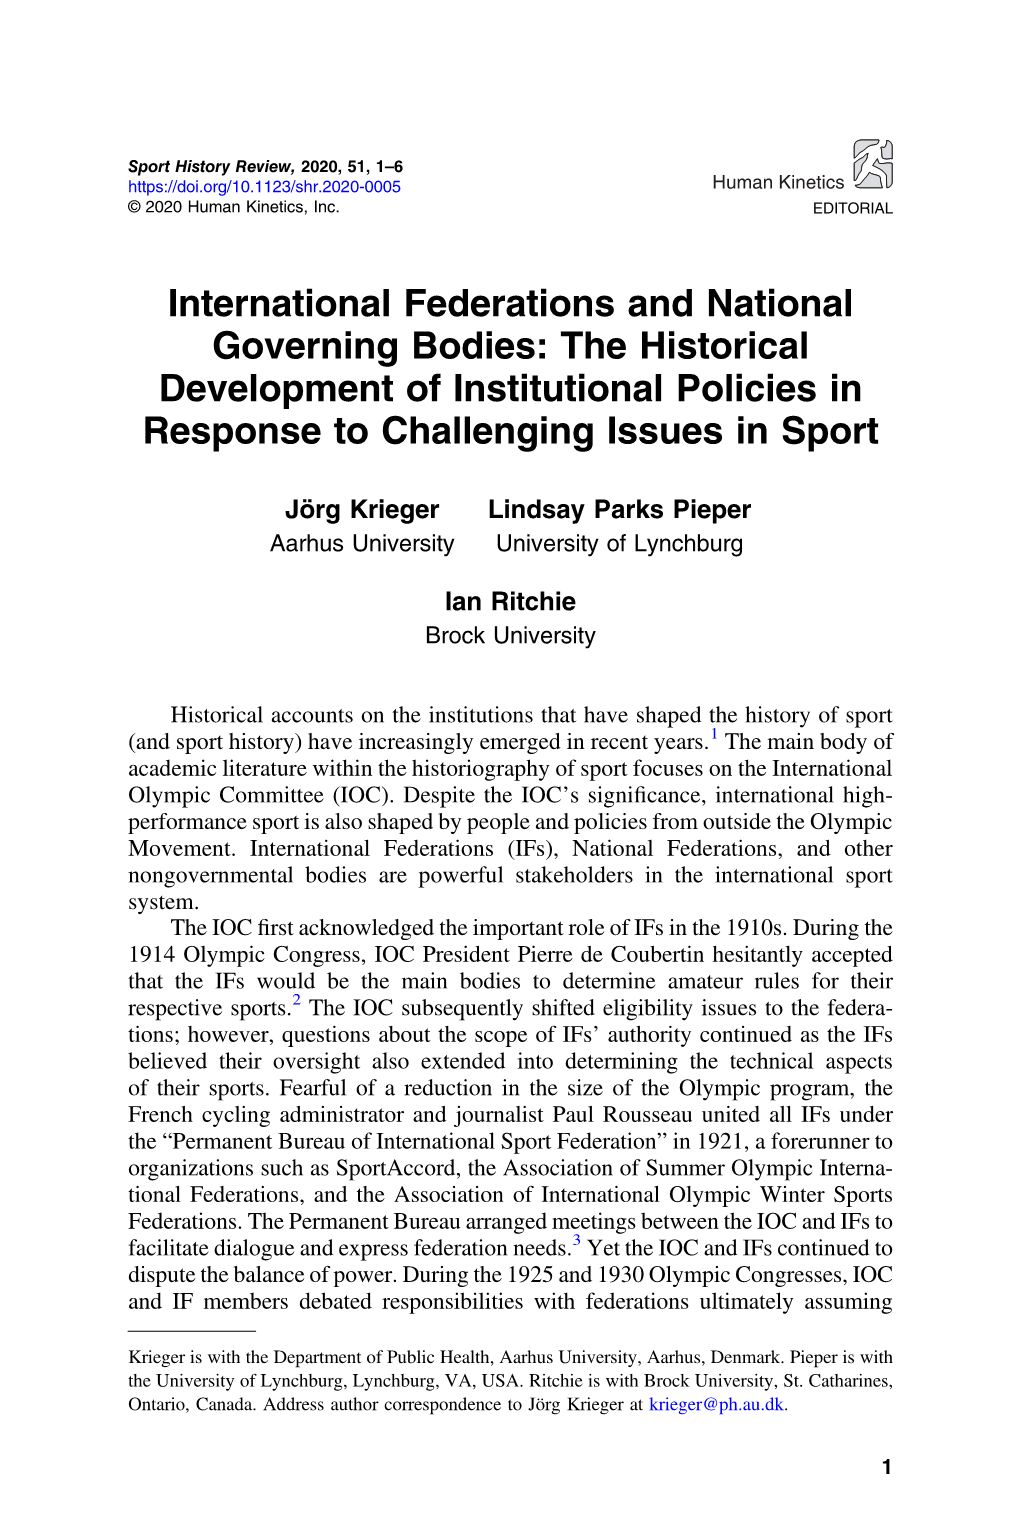 International Federations and National Governing Bodies: the Historical Development of Institutional Policies in Response to Challenging Issues in Sport